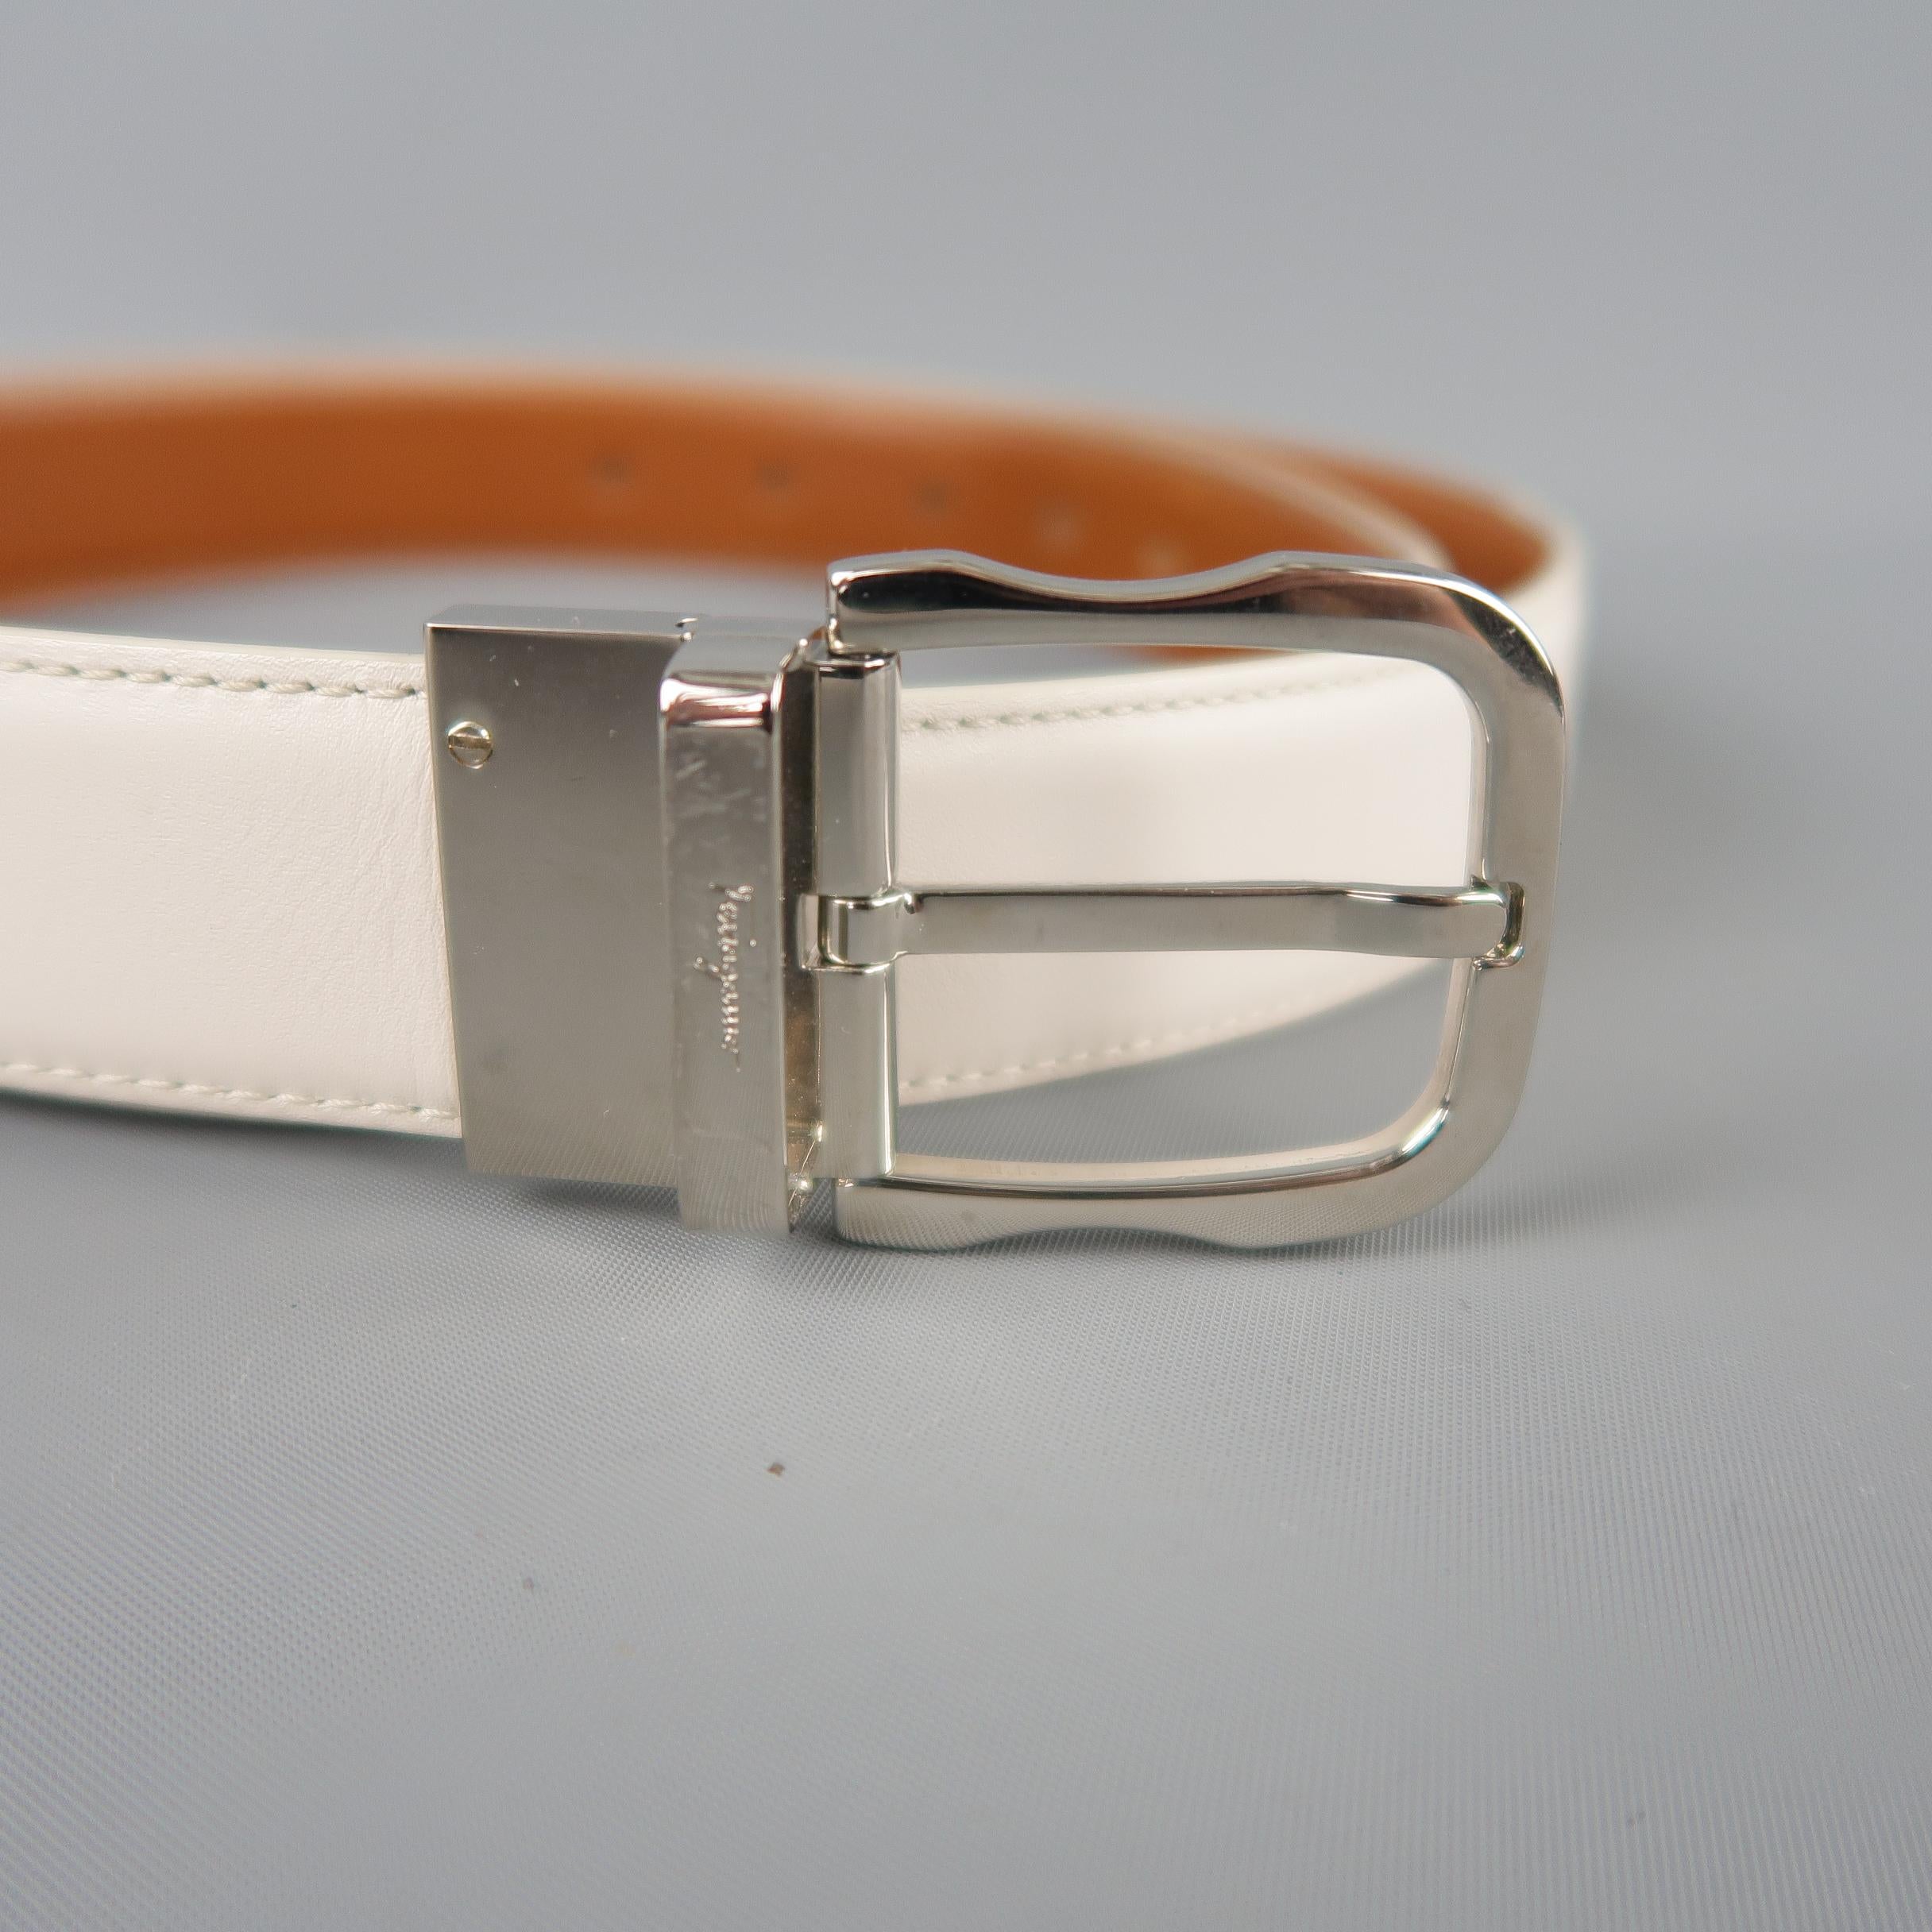 SALVATORE FERRAGAMO reversible dress belt features a dual tone white and tan smooth leather strap with silver tone engraved buckle. Made in Italy.
 
Good Pre-Owned Condition.
Marked: (no size)
 
Length: 46 in.
Width: 1 in.
Fits: 38-42 in.